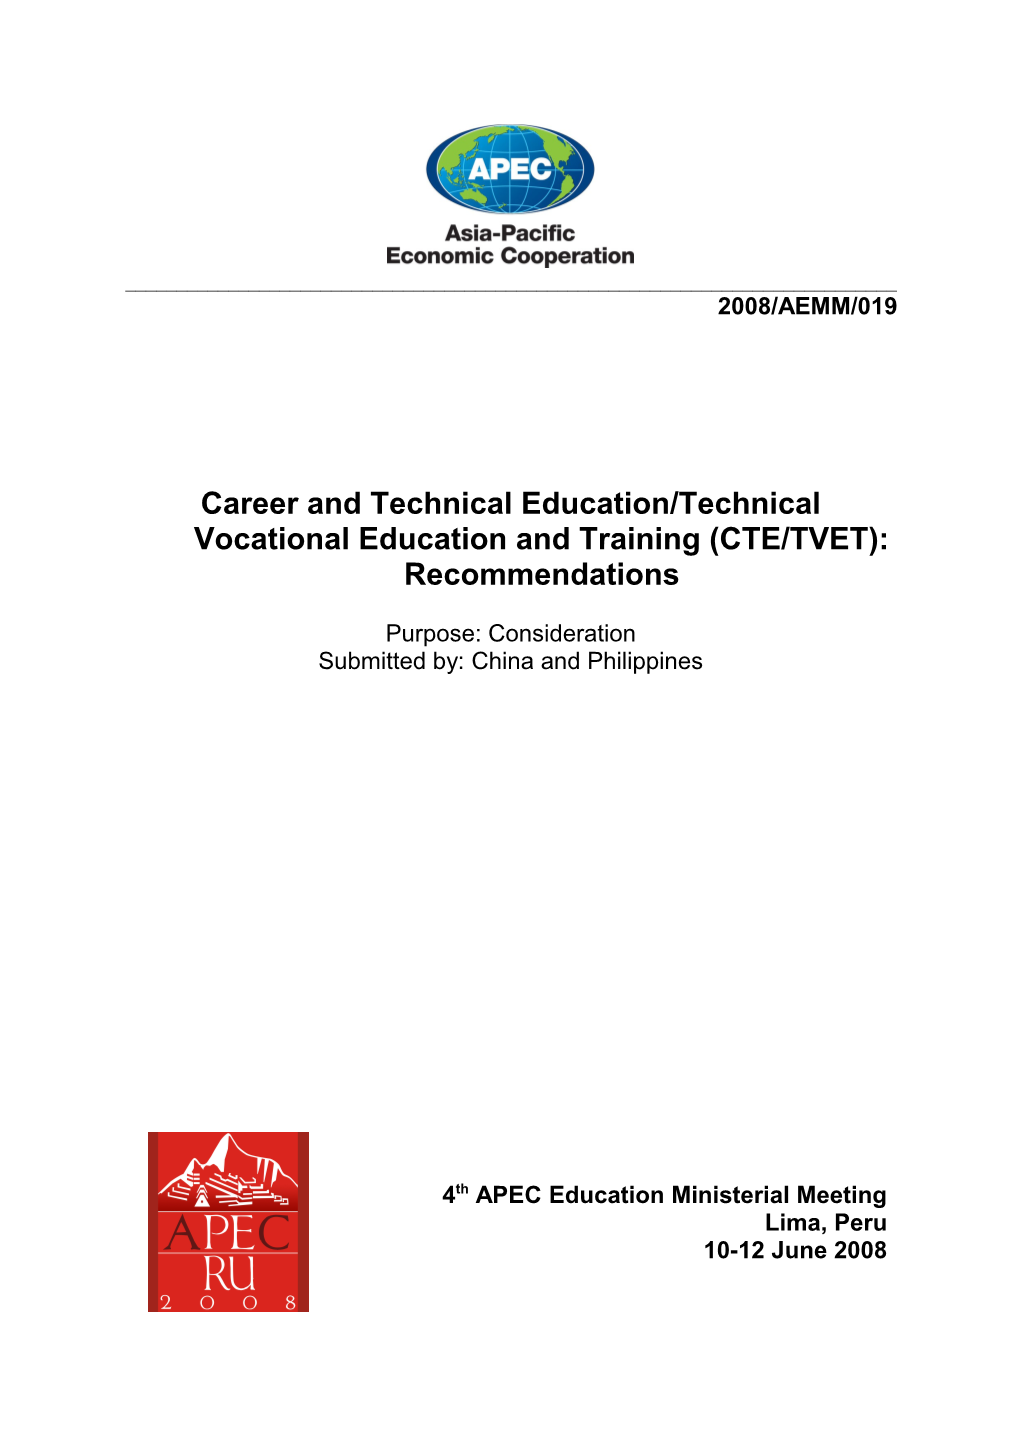 Career and Technical Education/Technical Vocational Education and Training (CTE/TVET)